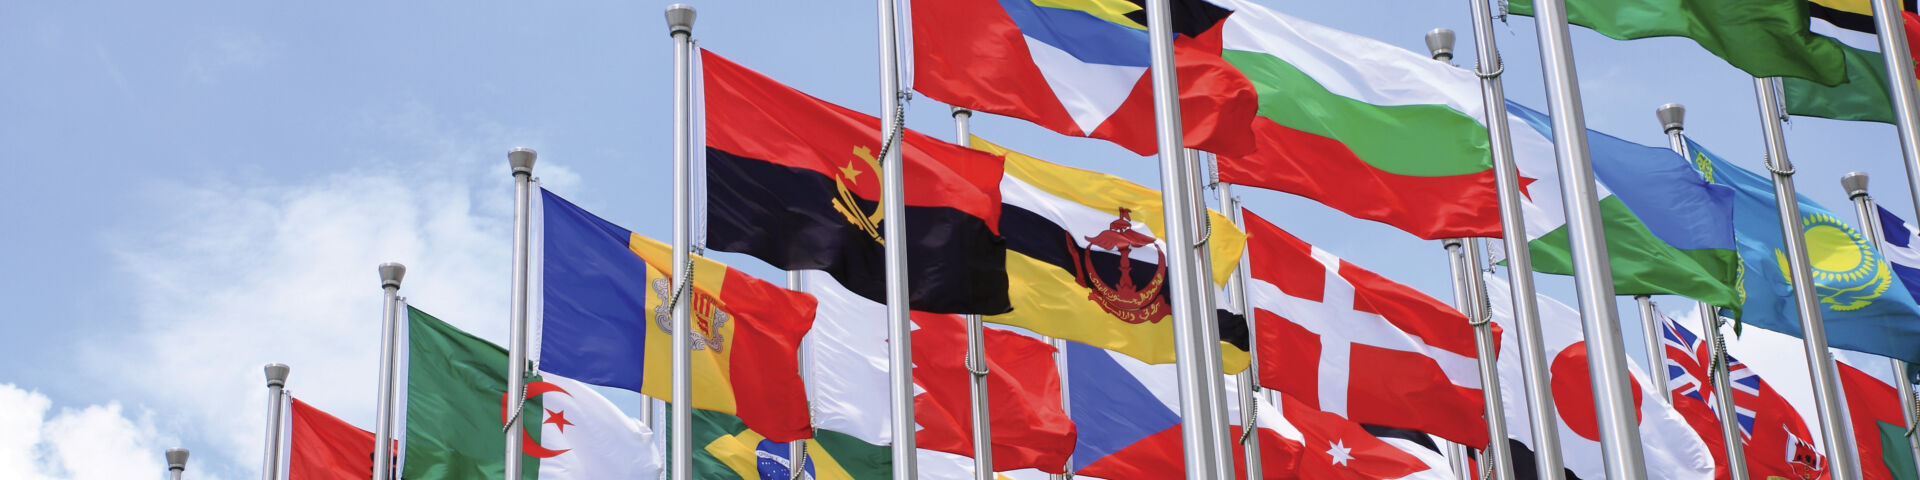 Group of international flags on a blue sky background